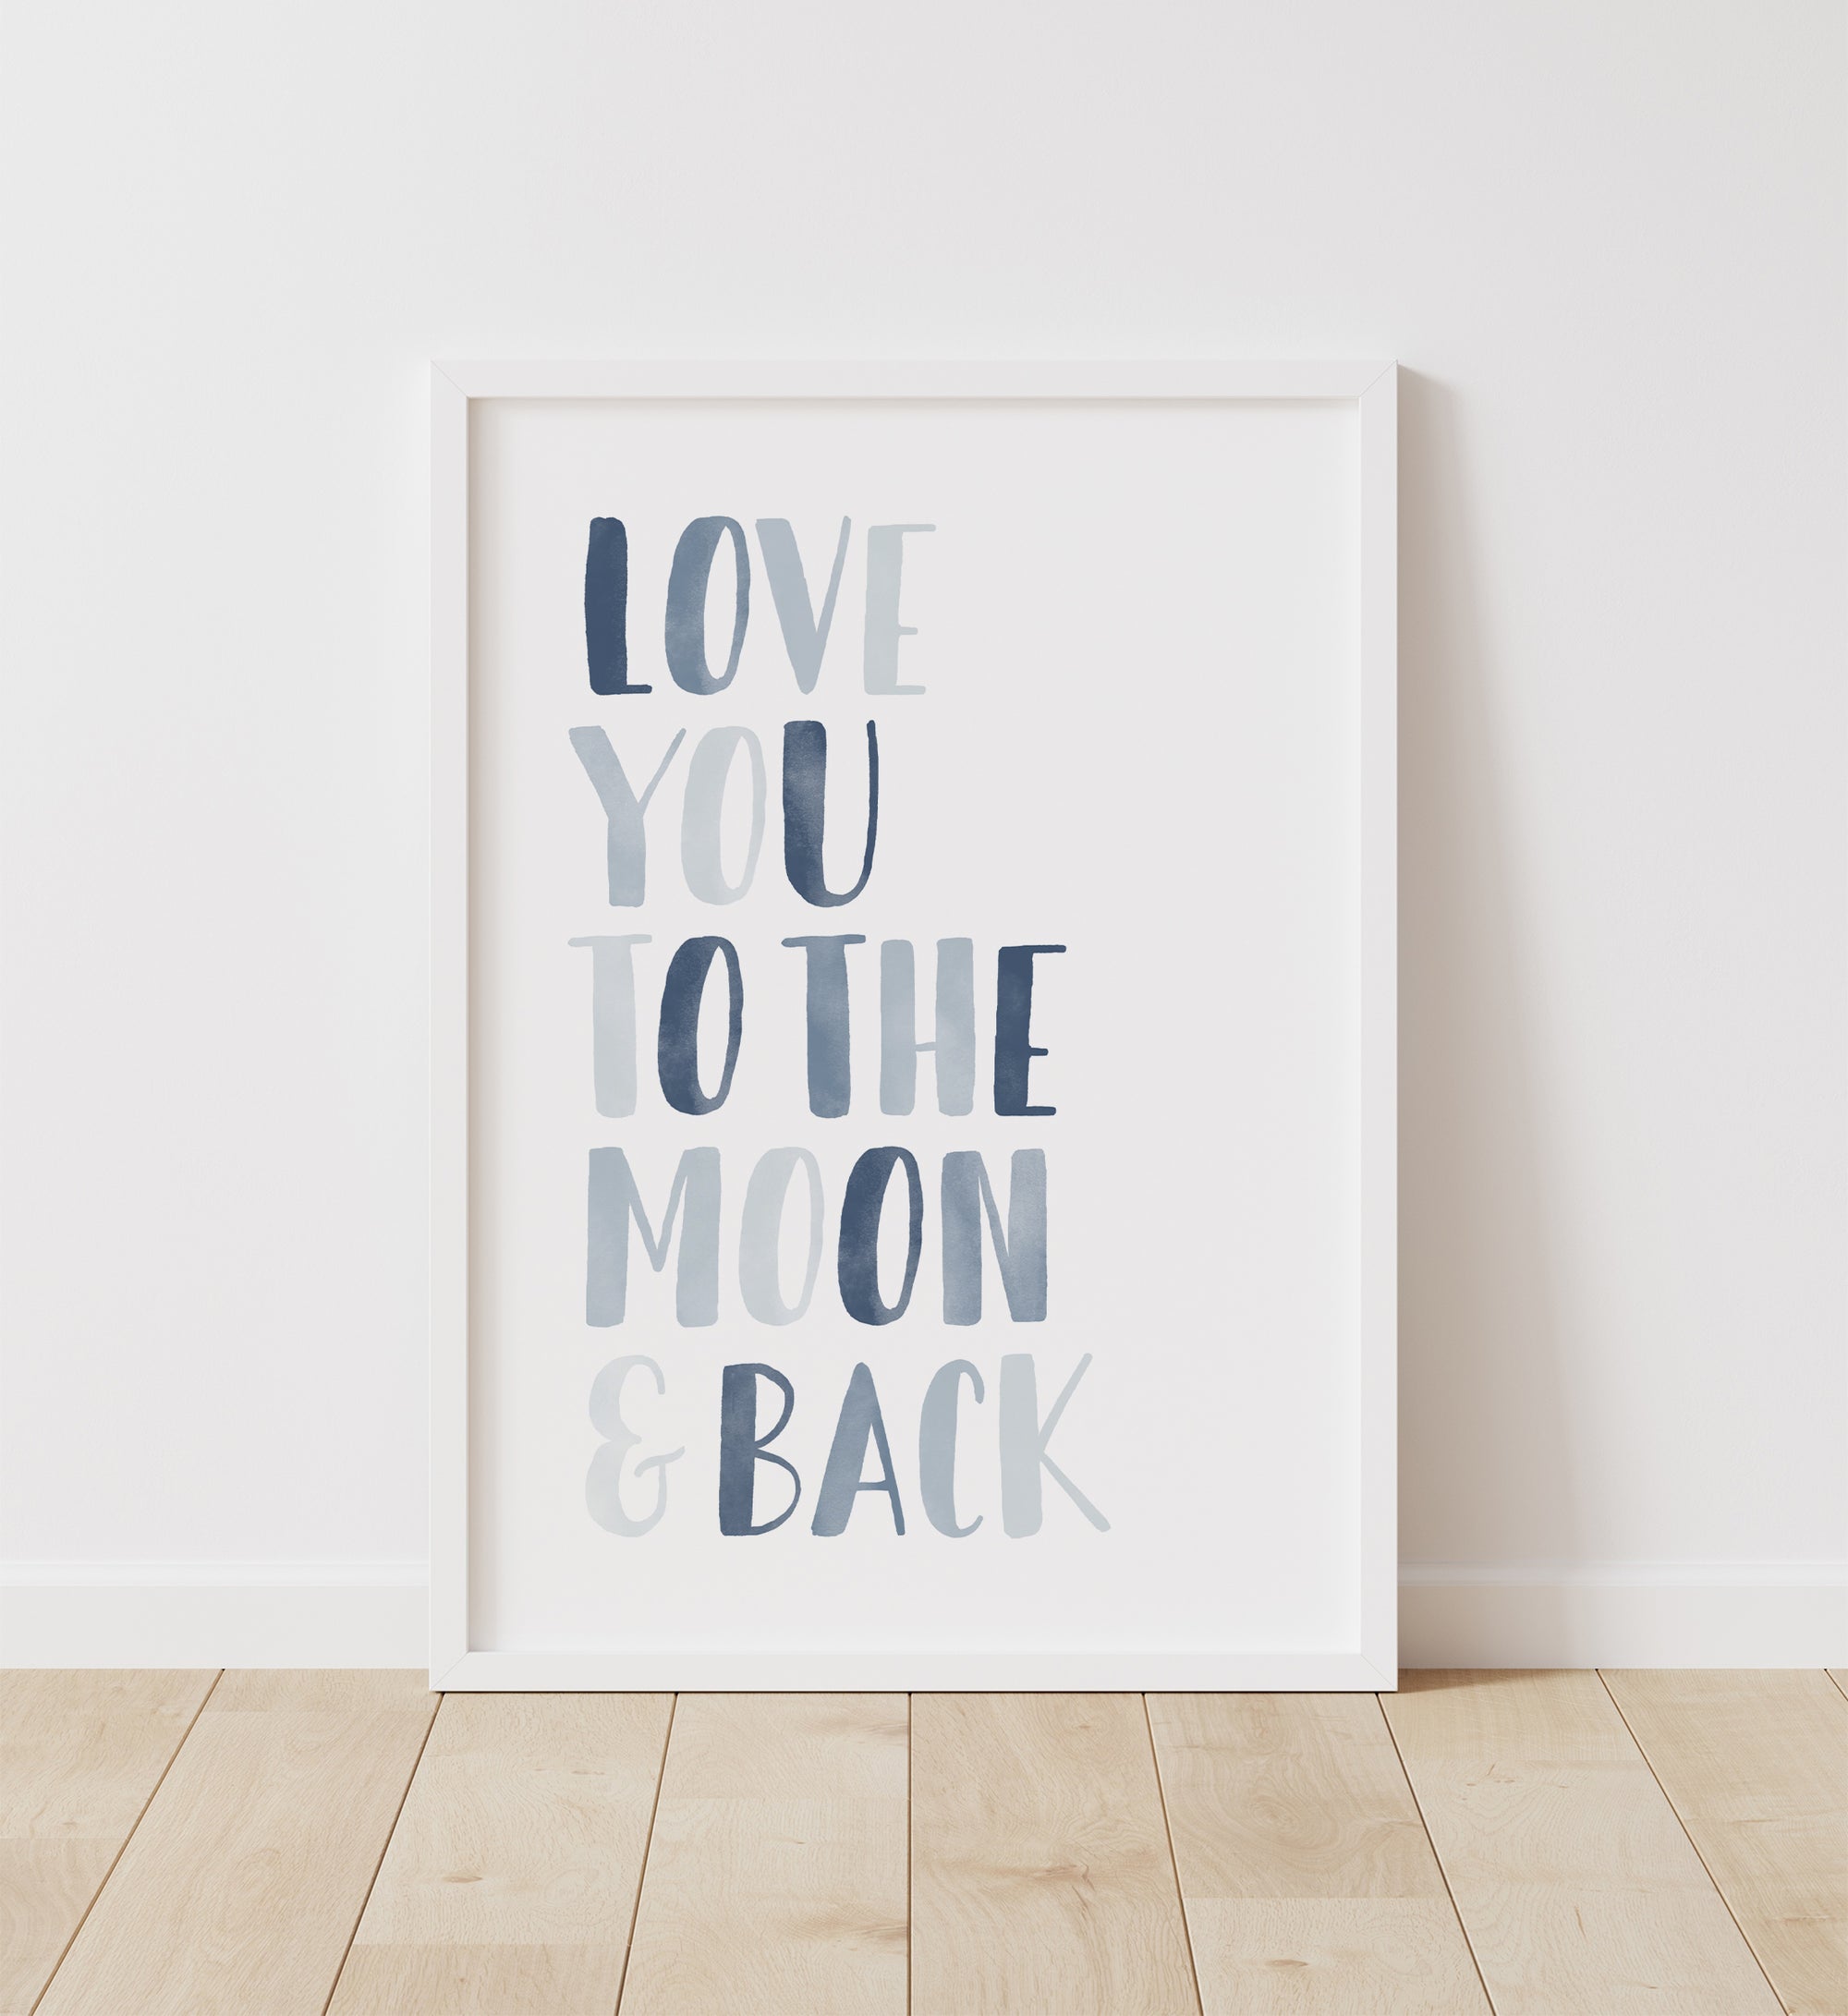 Love You to the Moon and Back Print - NBCP